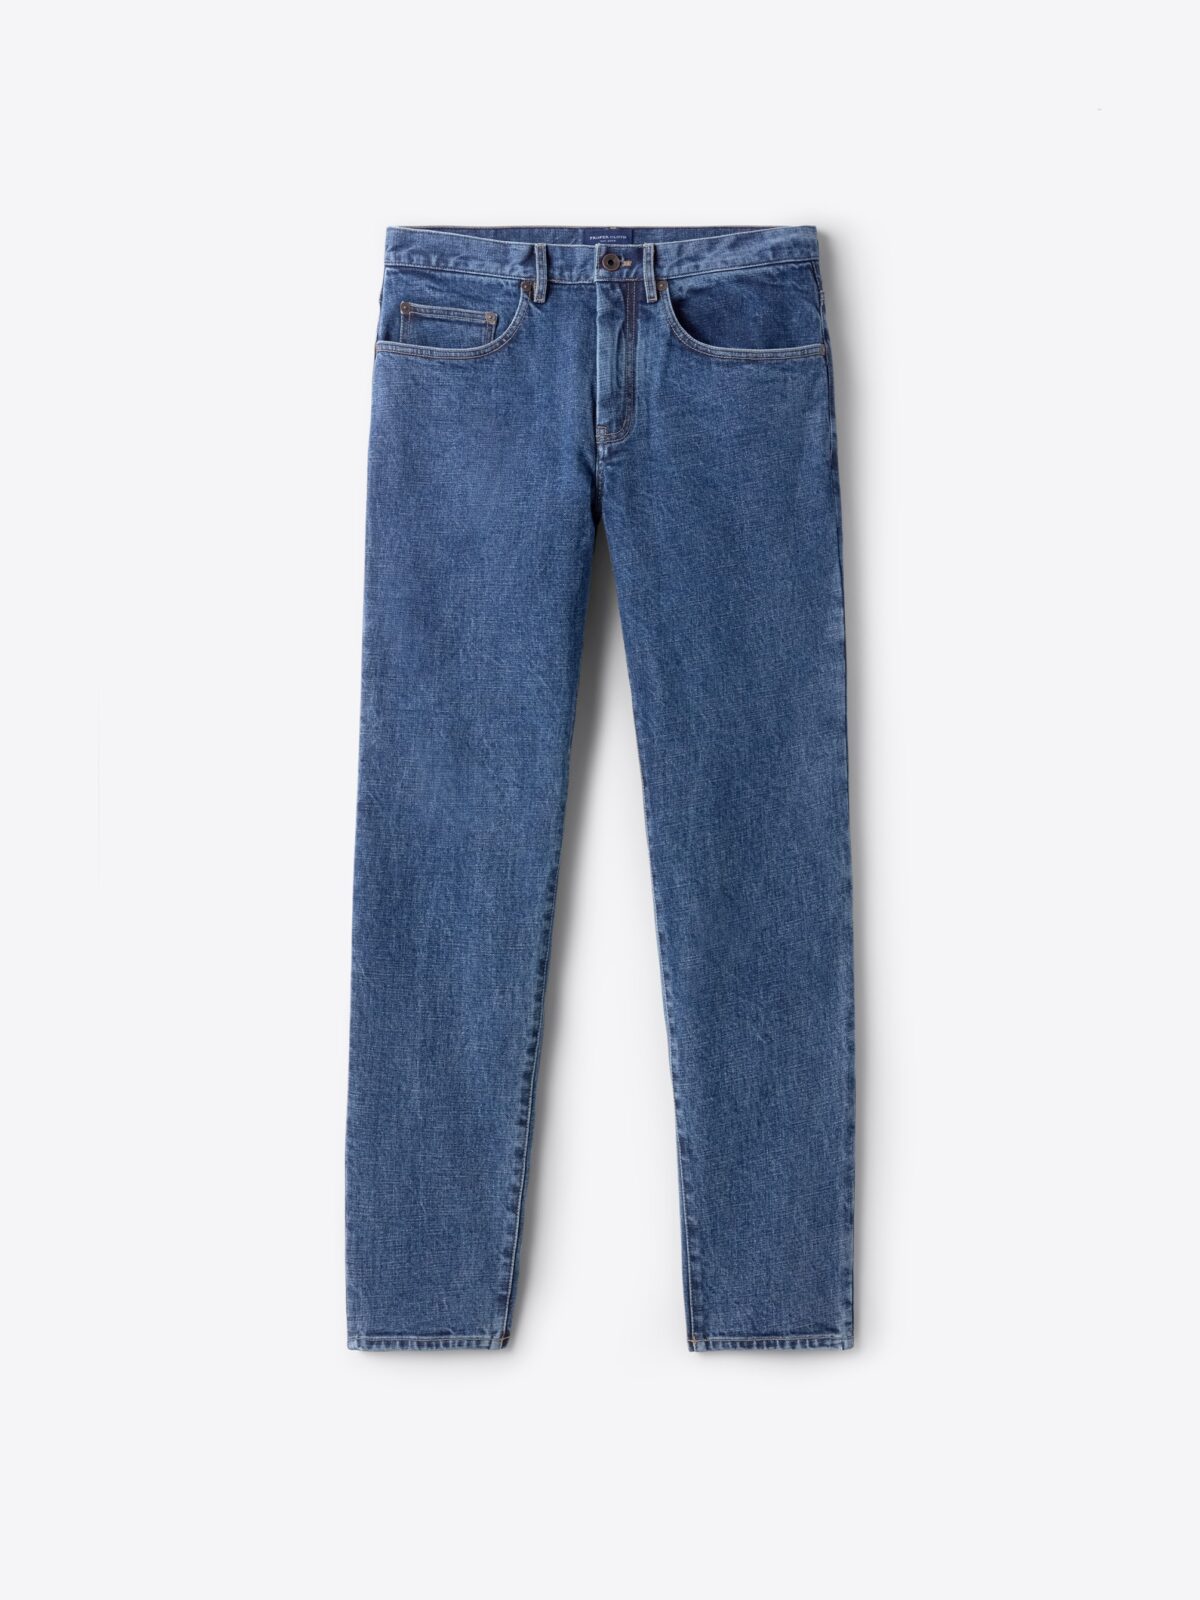 H&M Shaping Skinny Regular Jeans  14 of the Cutest Gifts We Found